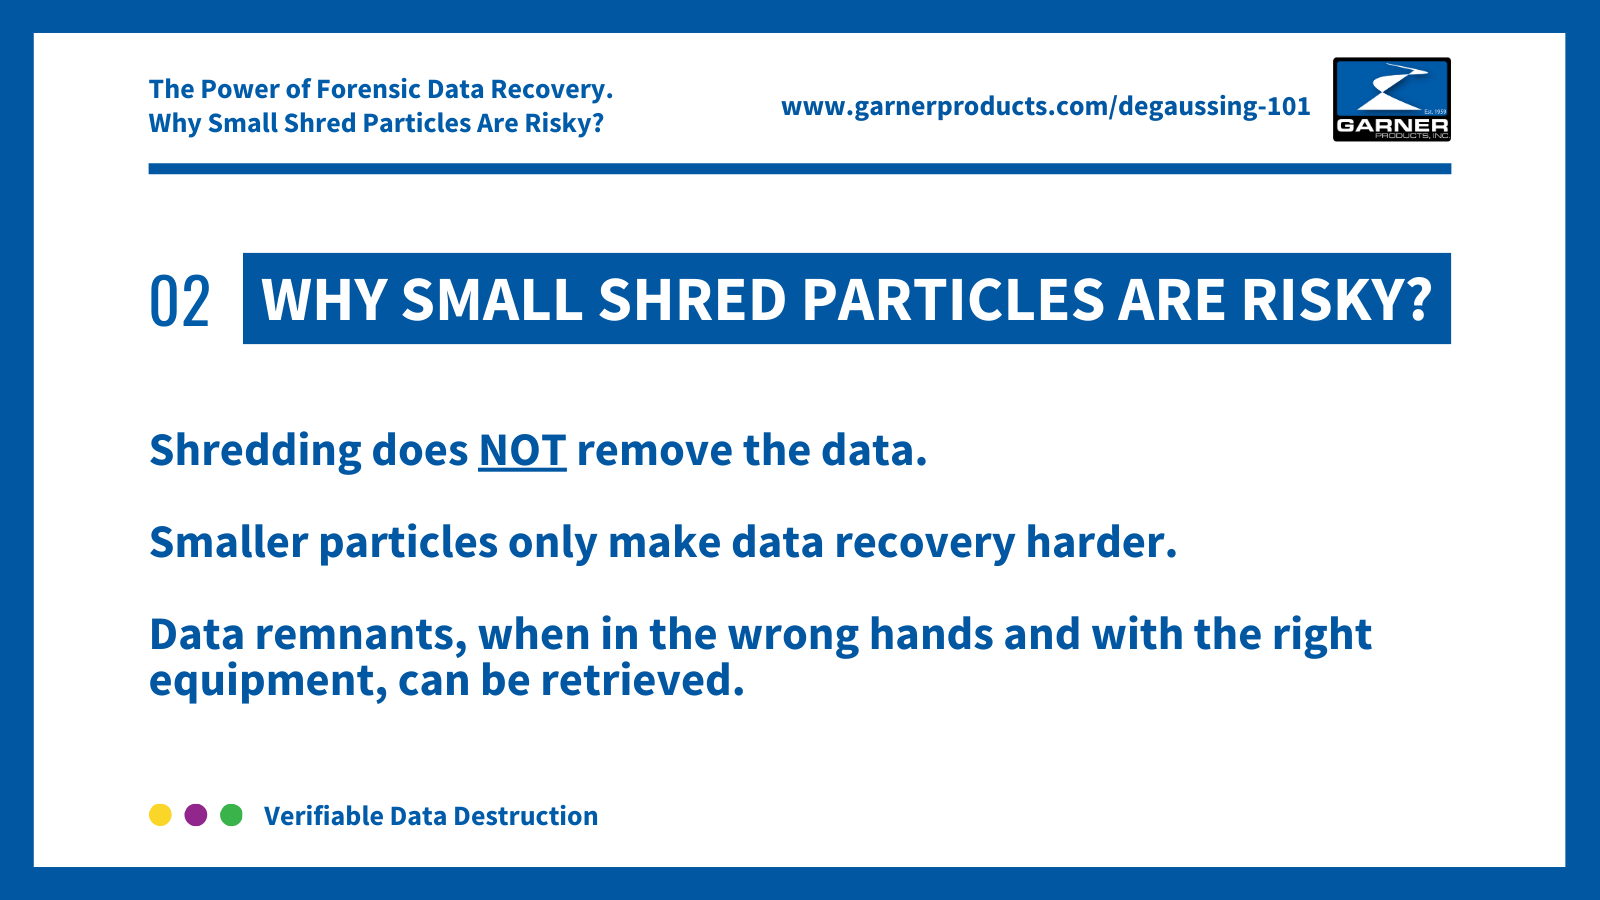 Shredding does not remove the data - small shred particles are risky